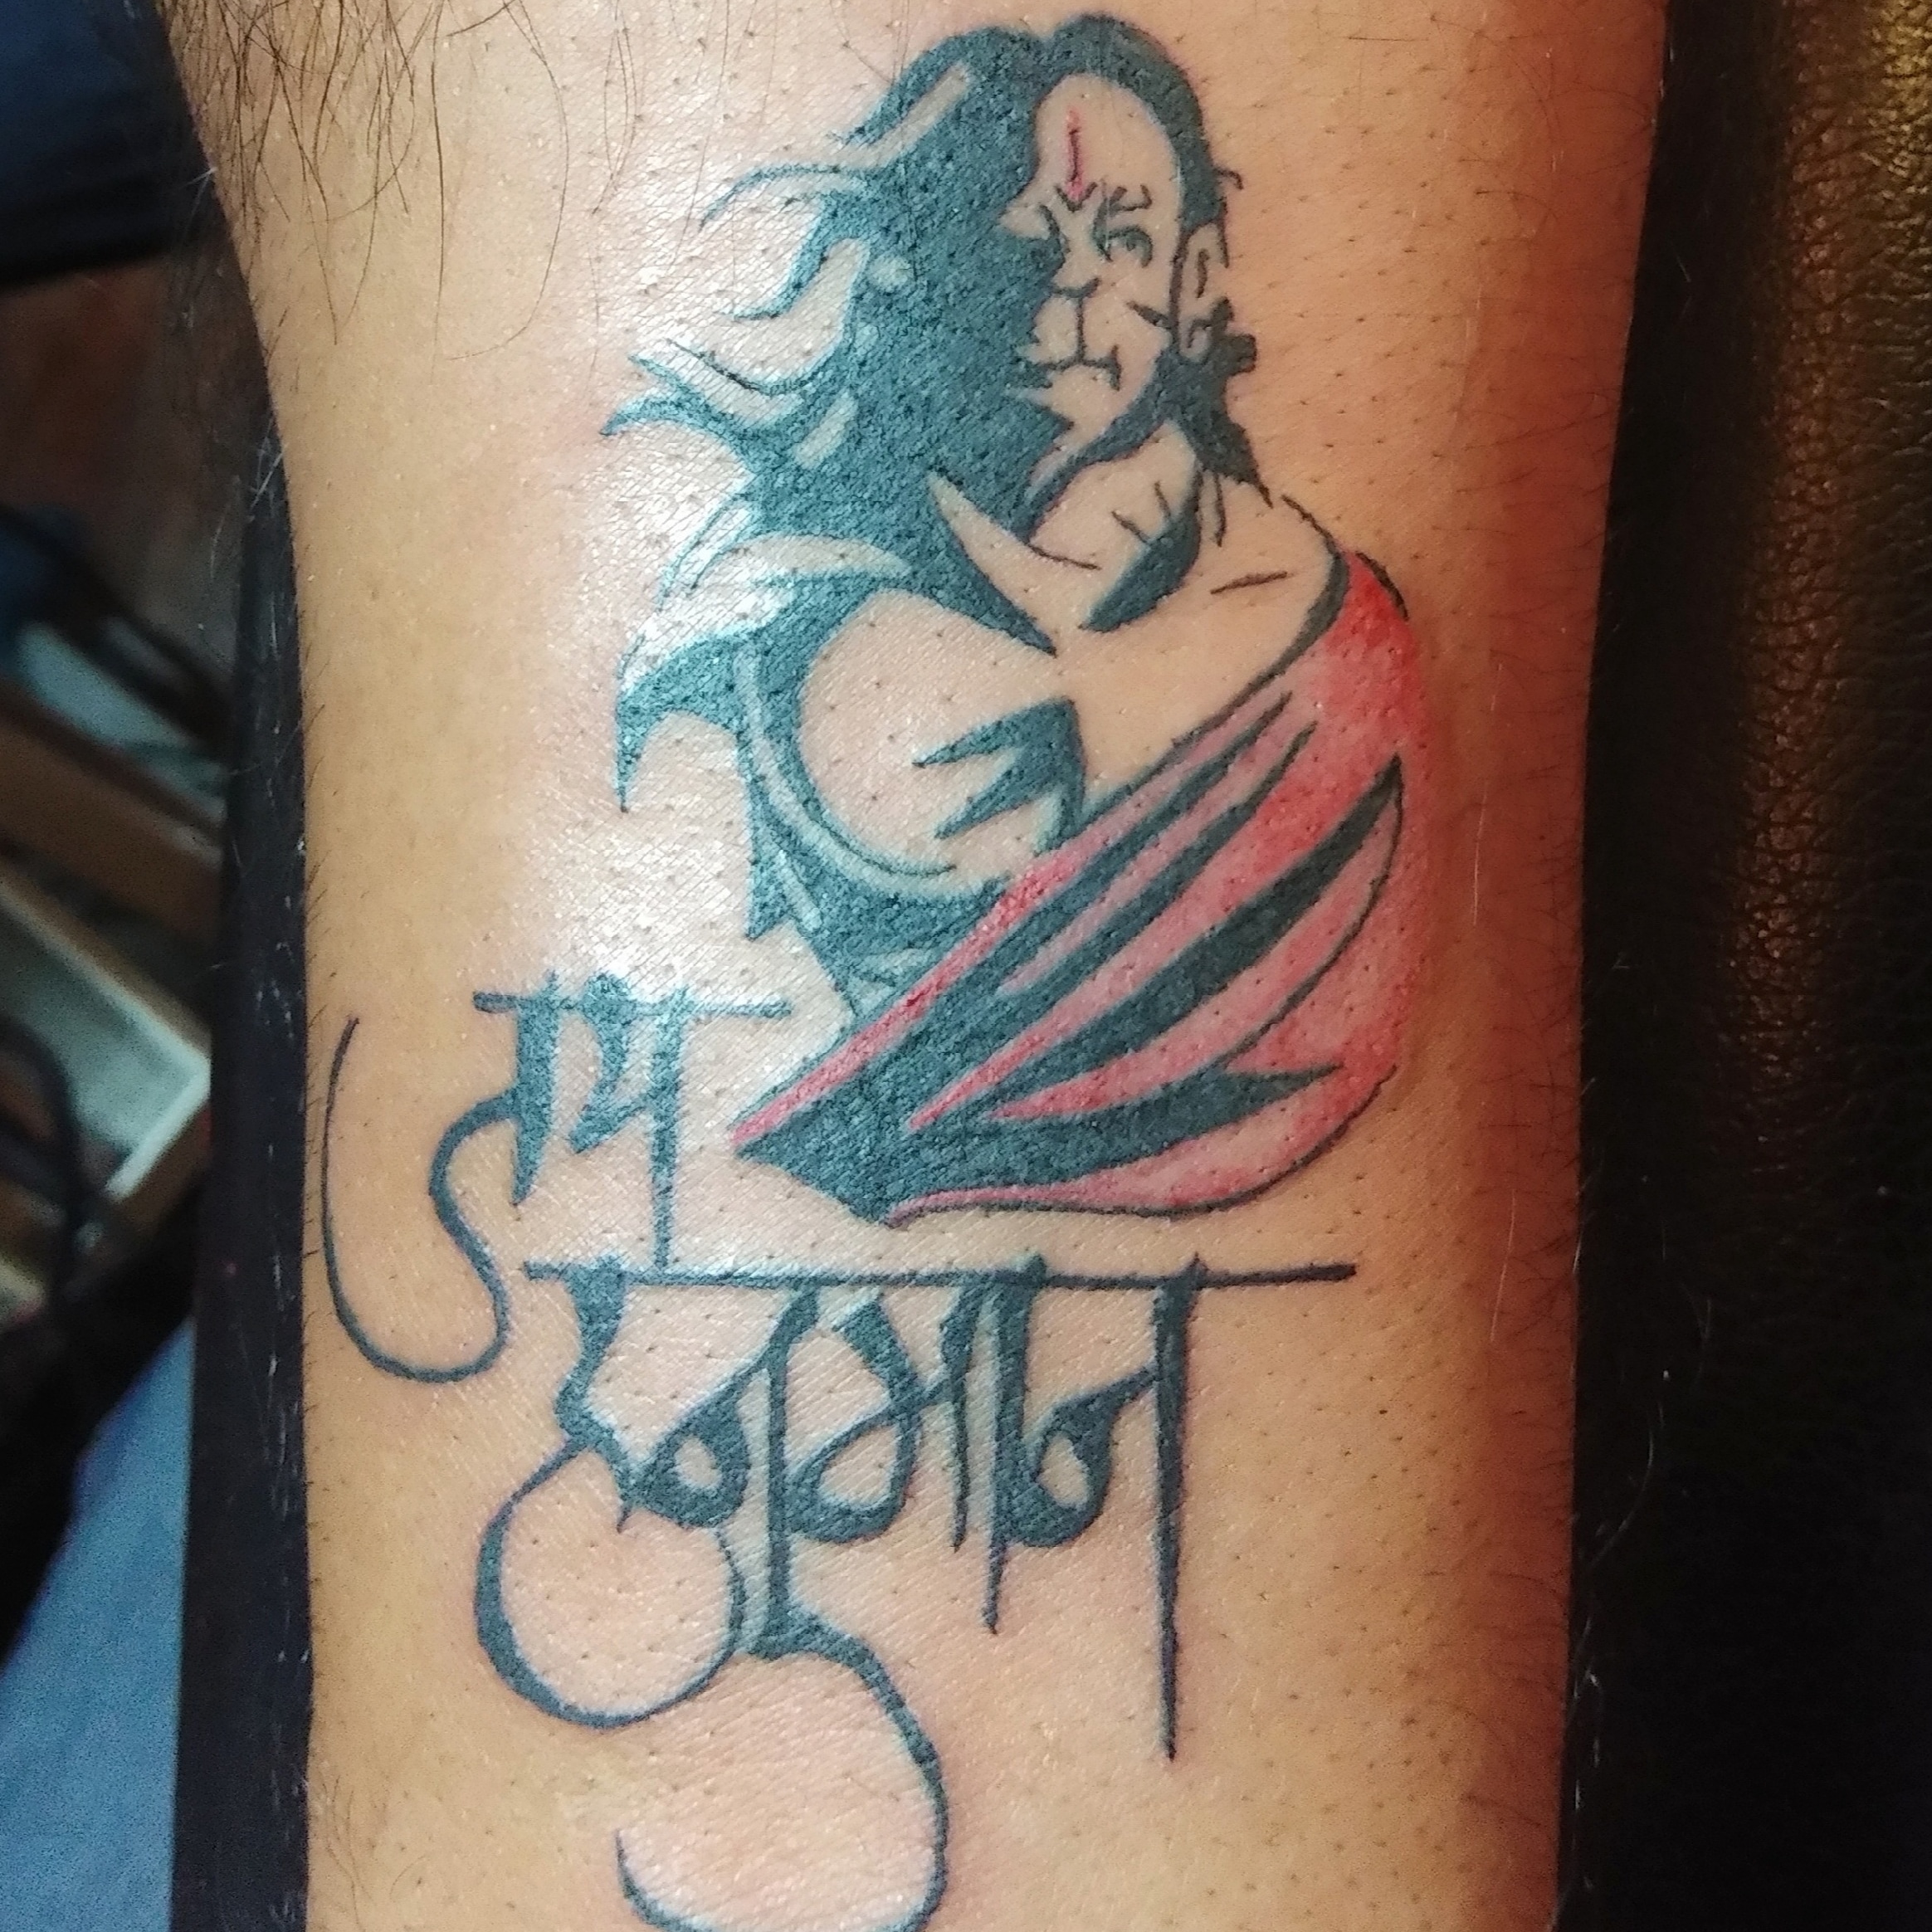 Share 78 about angry bajrangbali tattoo super cool  indaotaonec